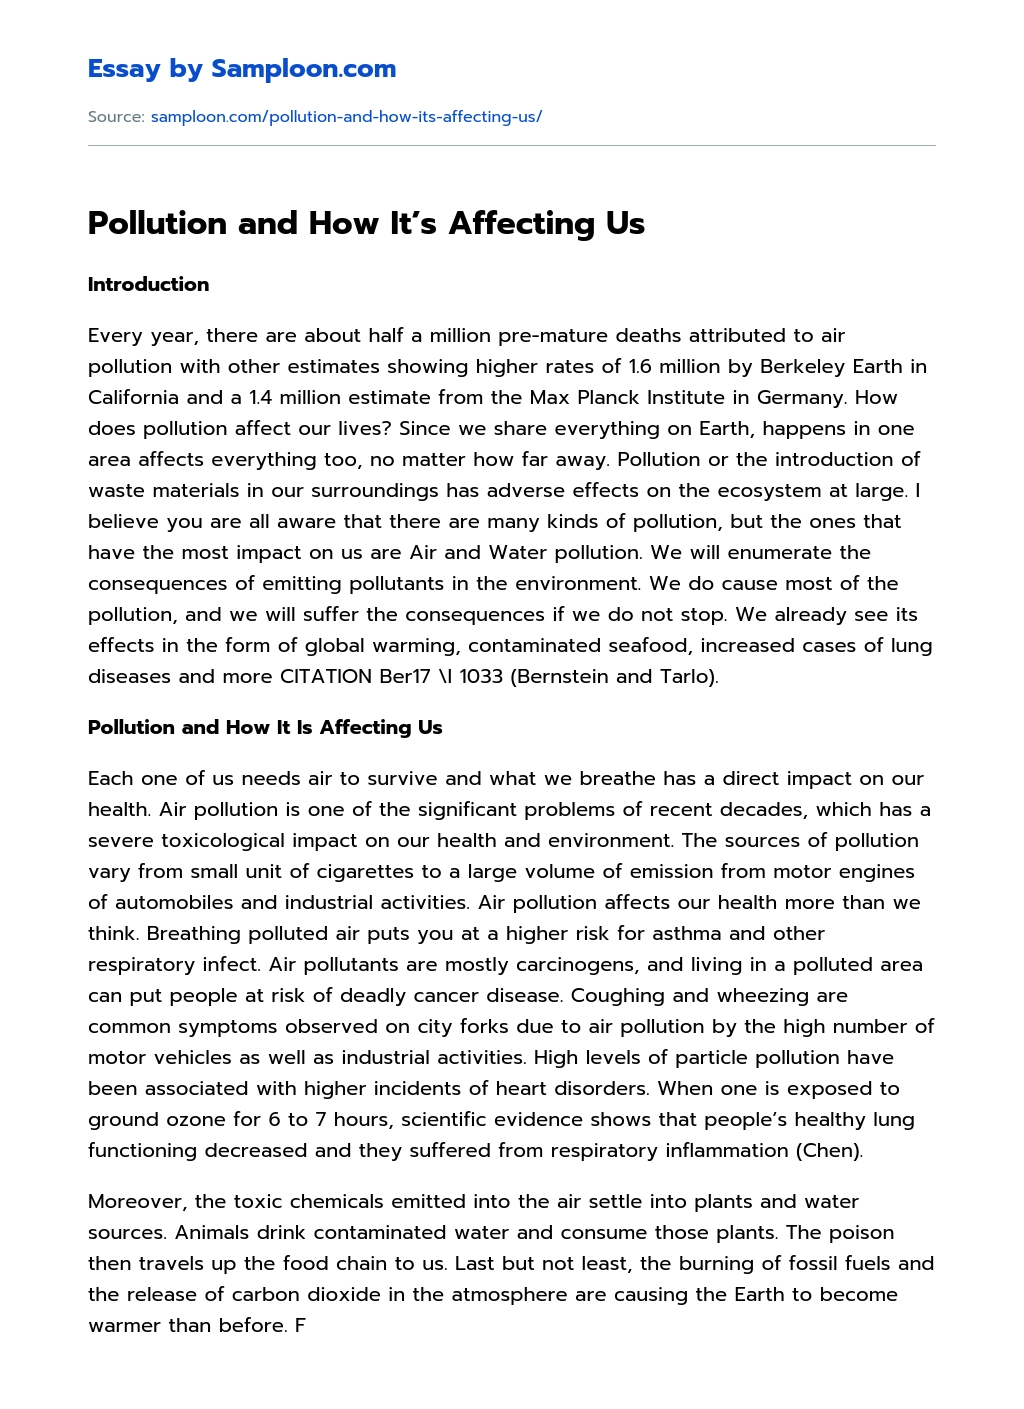 Pollution and How It’s Affecting Us essay